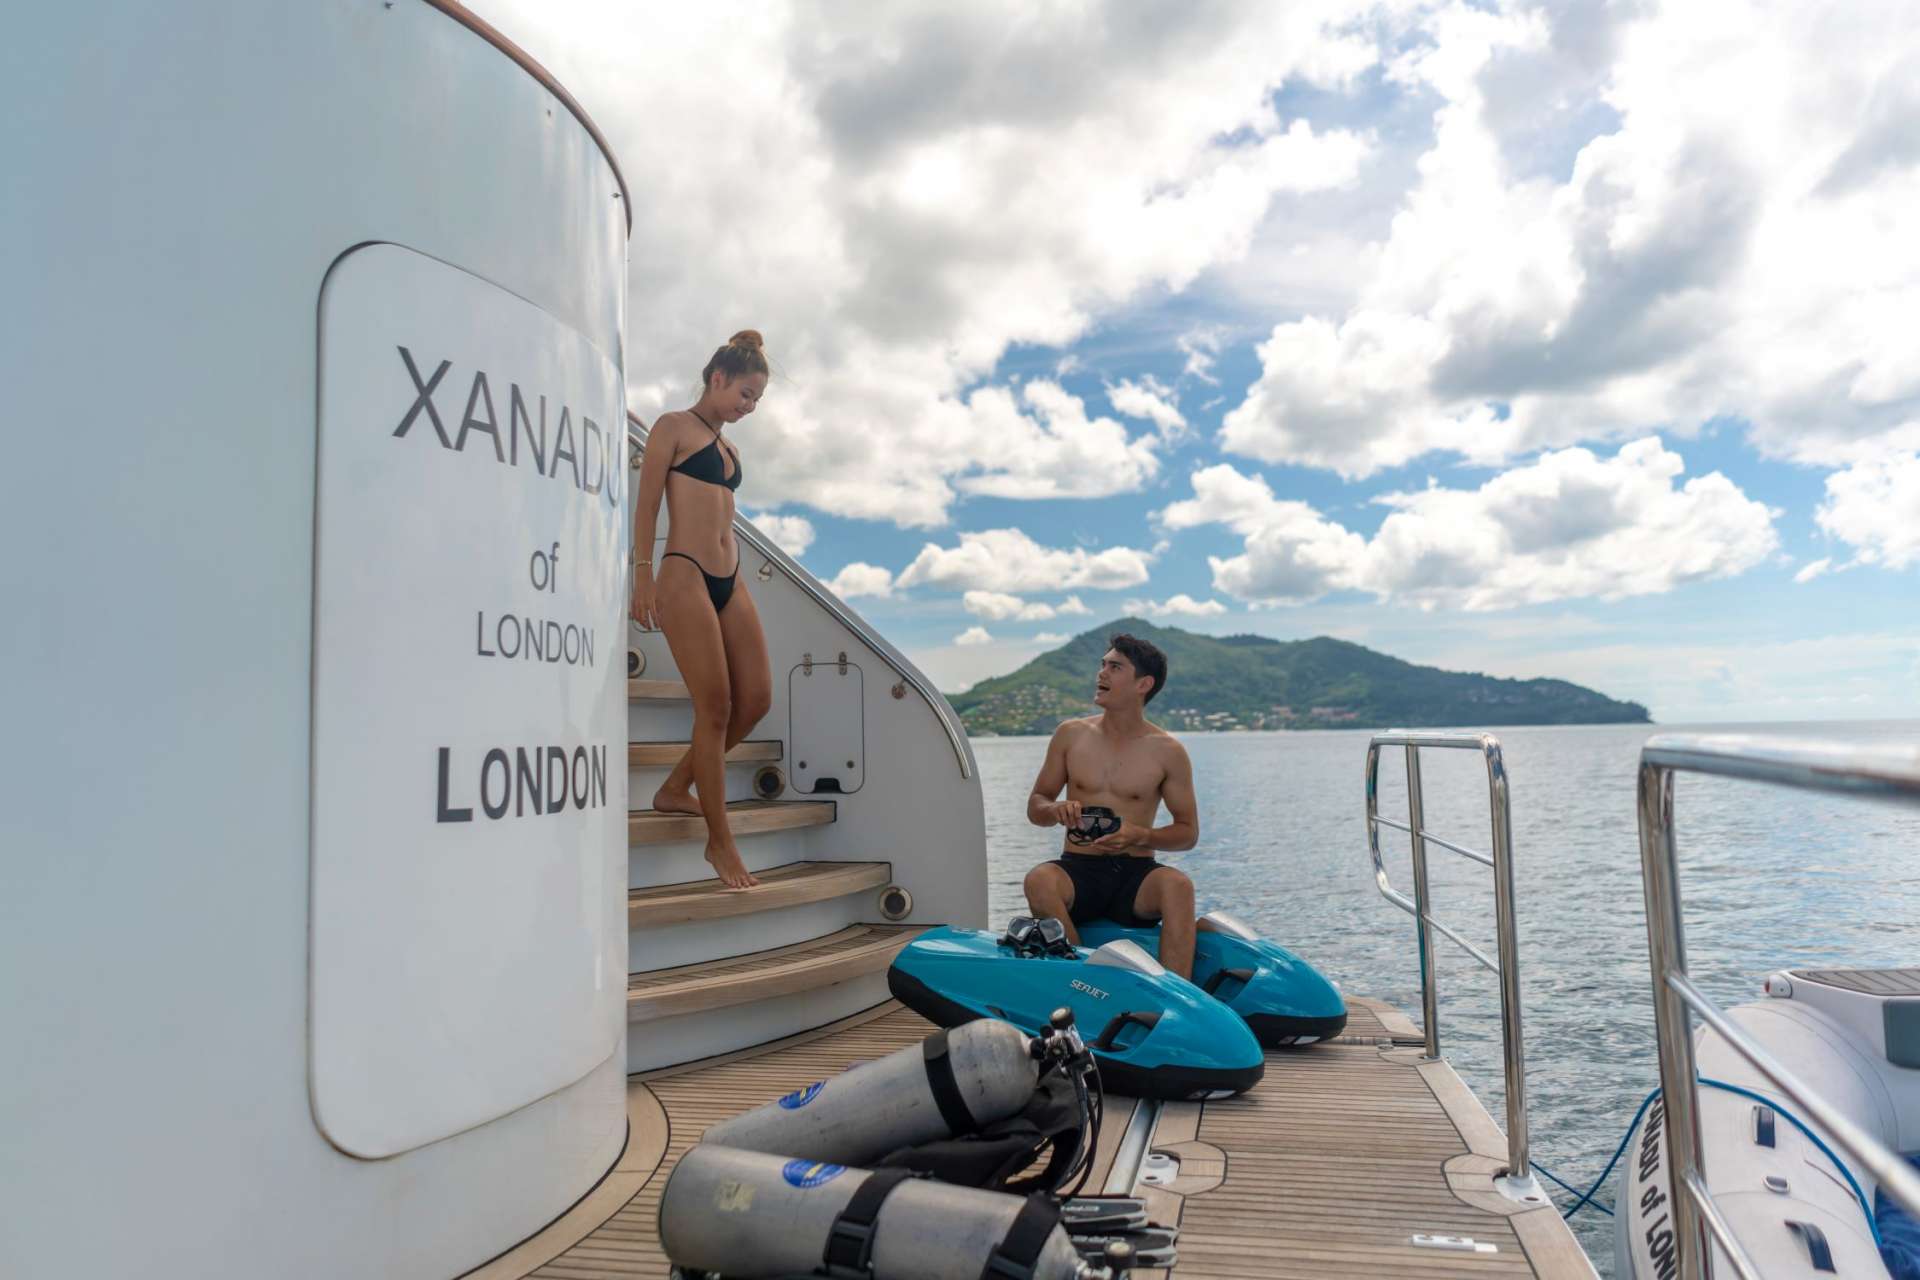 xanadu of london - Yacht Charter Philippines & Boat hire in SE Asia 5